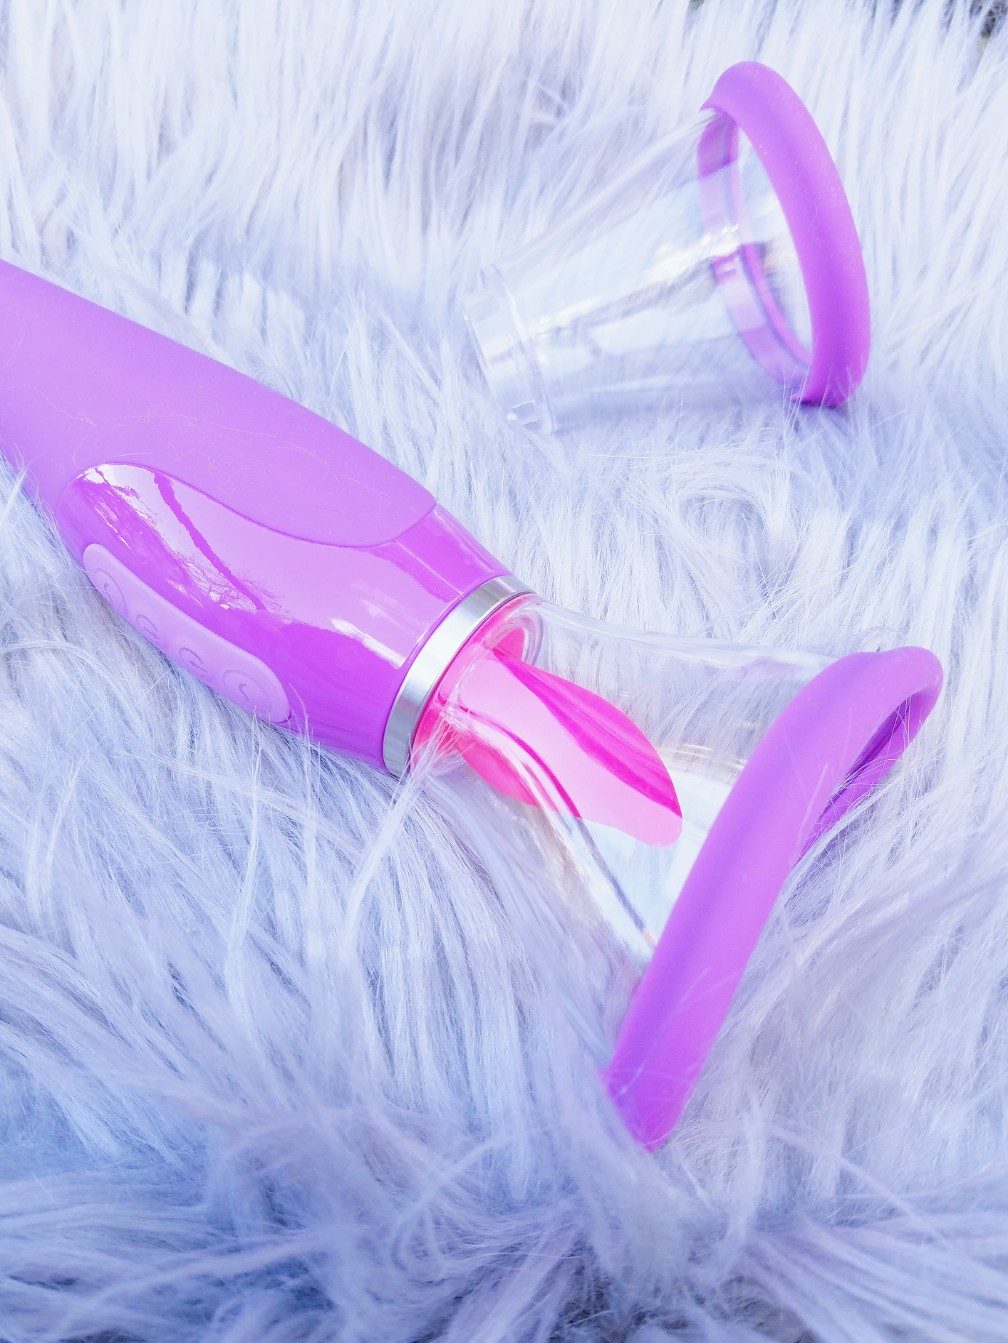 [Image: a closer look at the Her Ultimate Pleasure oval attachment's curved rim]